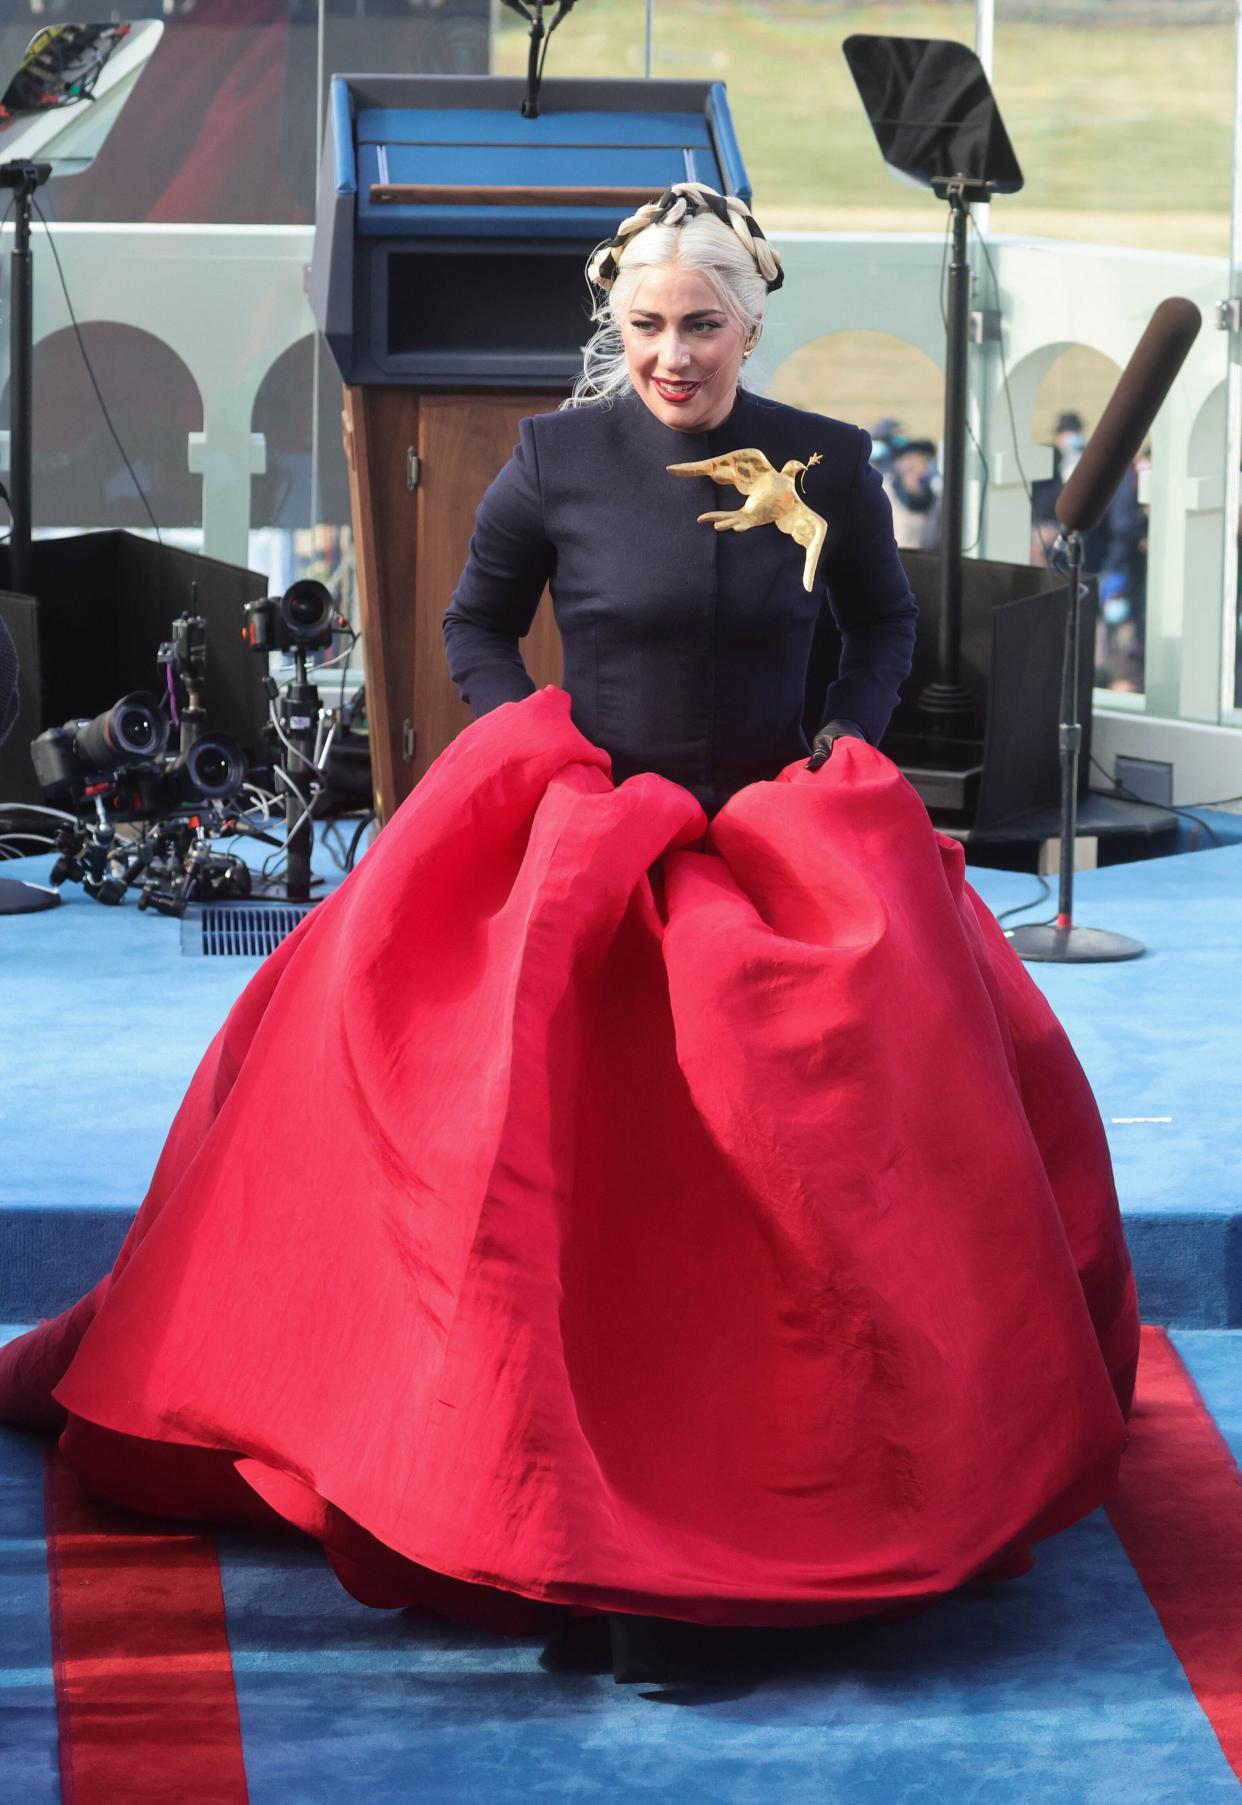 Lady Gaga picks up her skirt after singing the national anthem during the inauguration. (Photo: Pool via Getty Images)